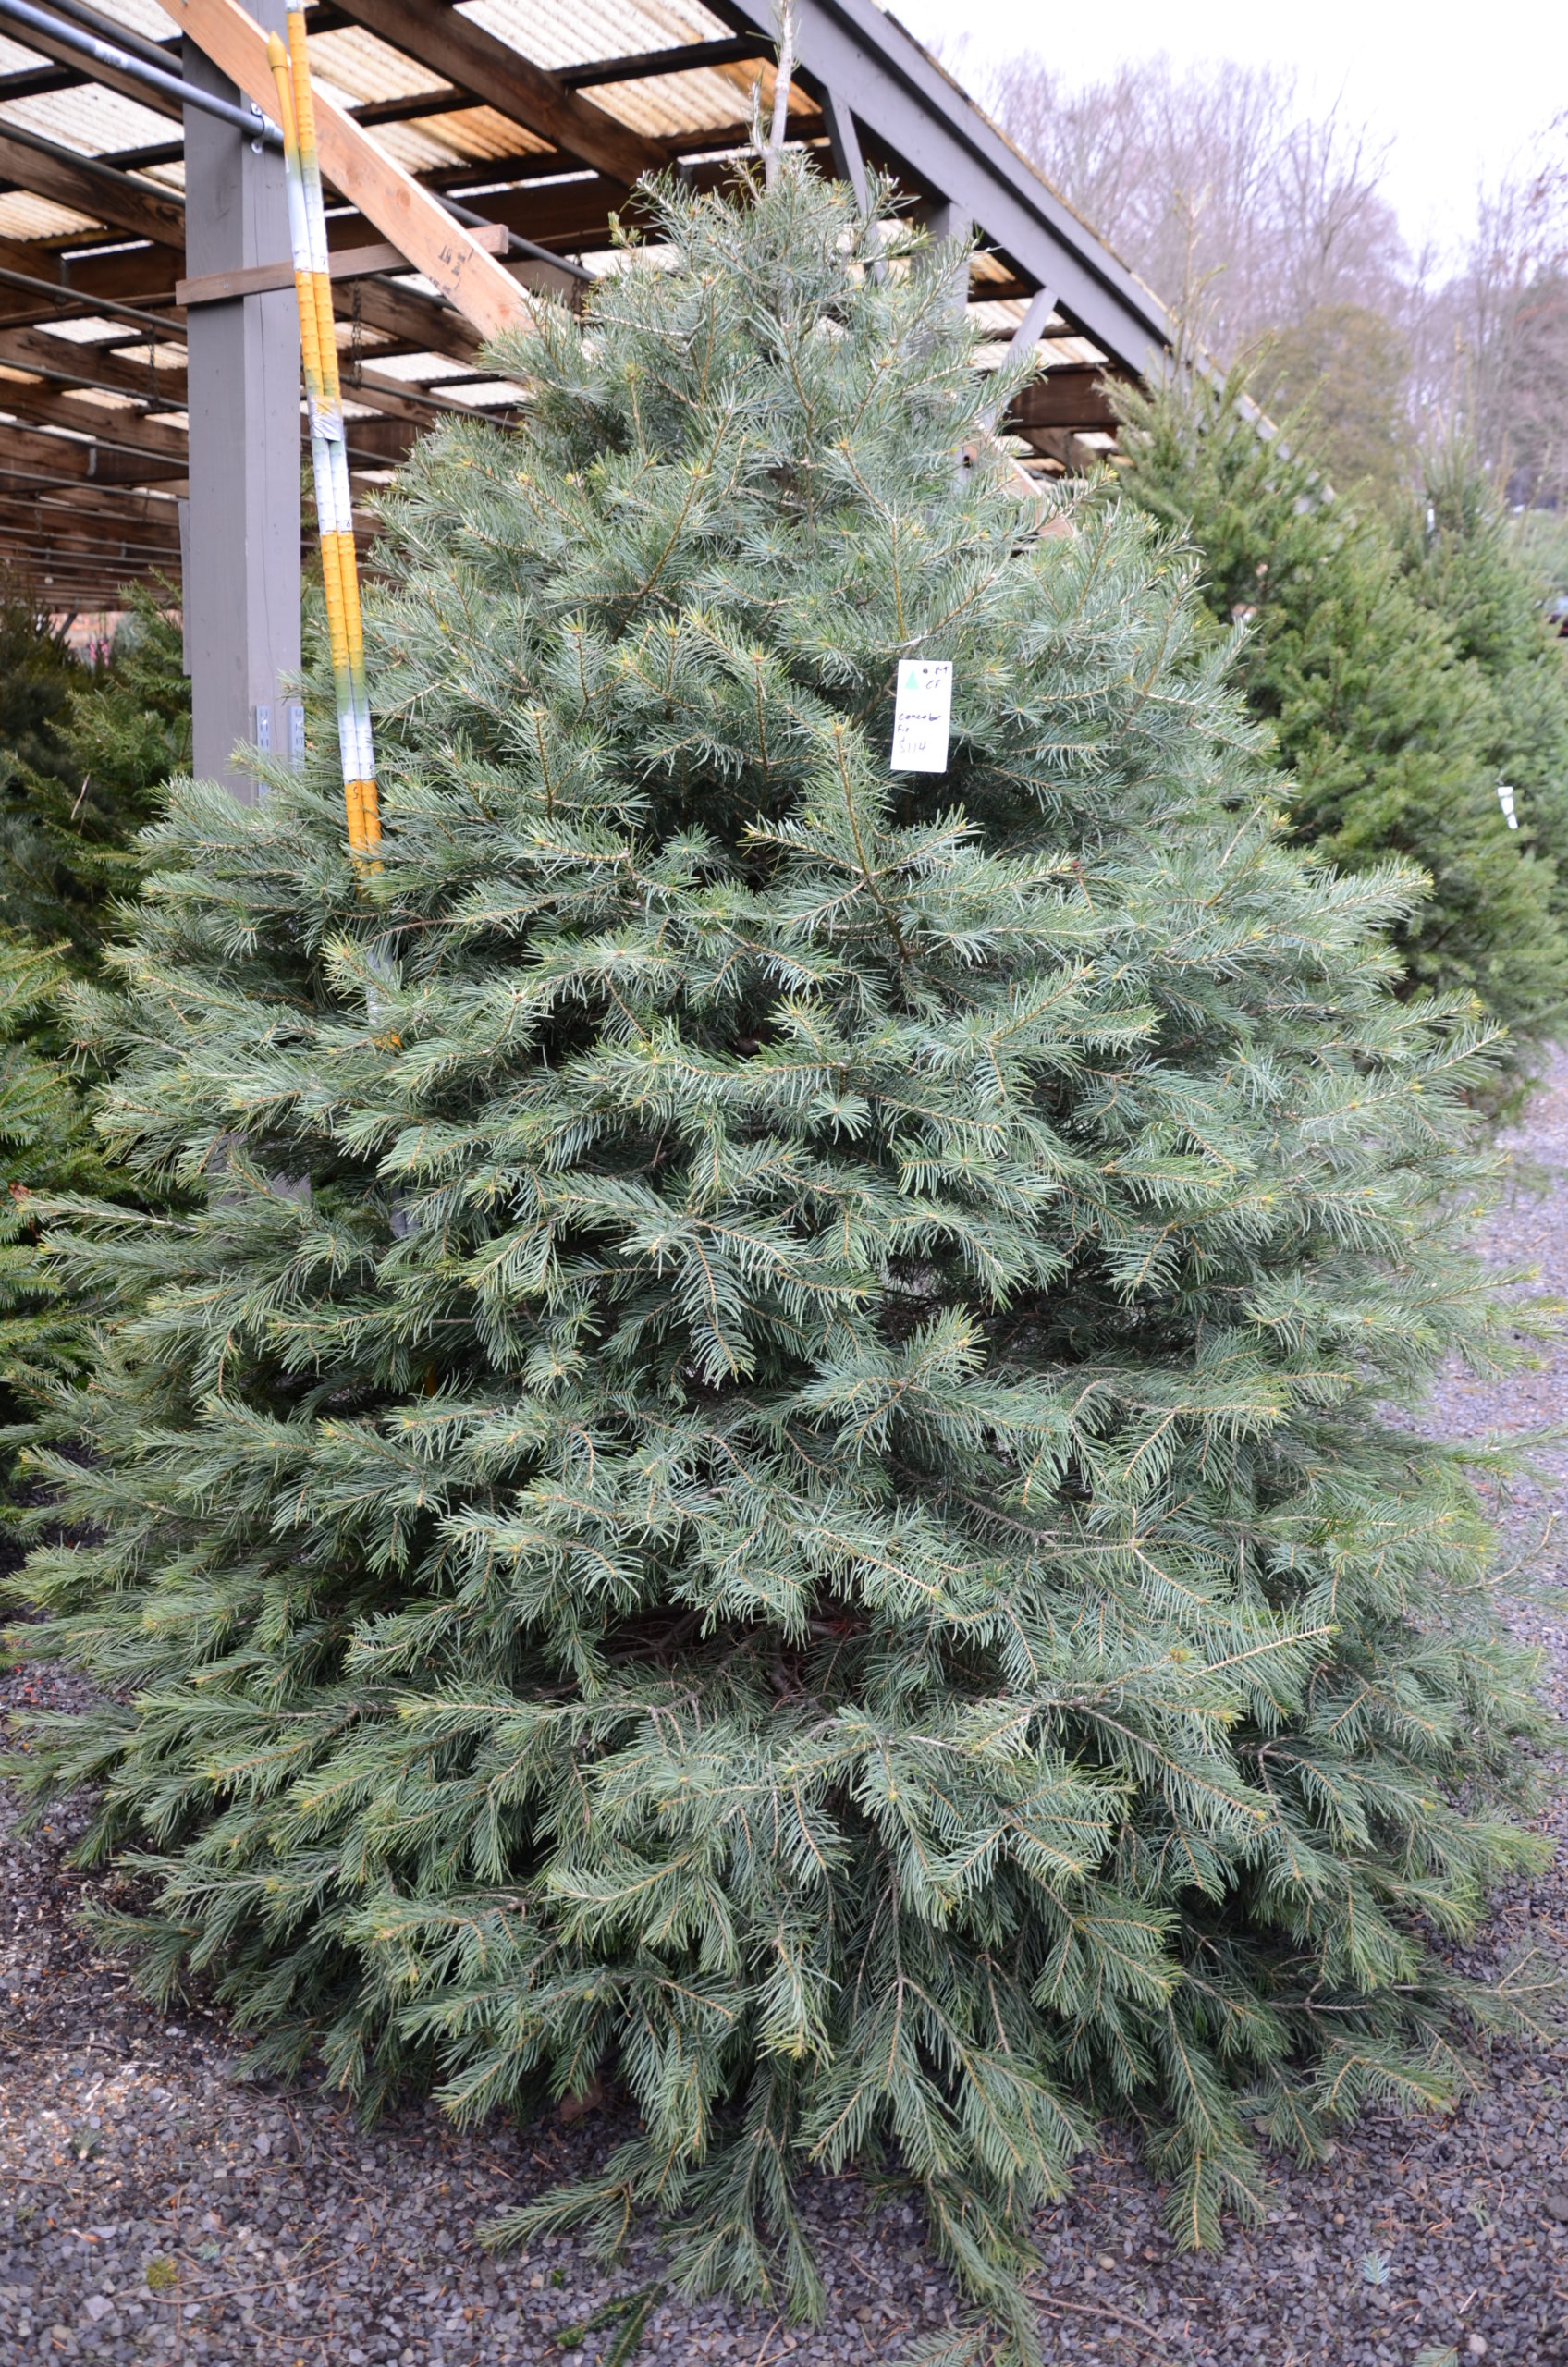 Concolor fir. This tree has an interesting scent and the needle color offers some new opportunities if you’re interested in a change from the traditional green.